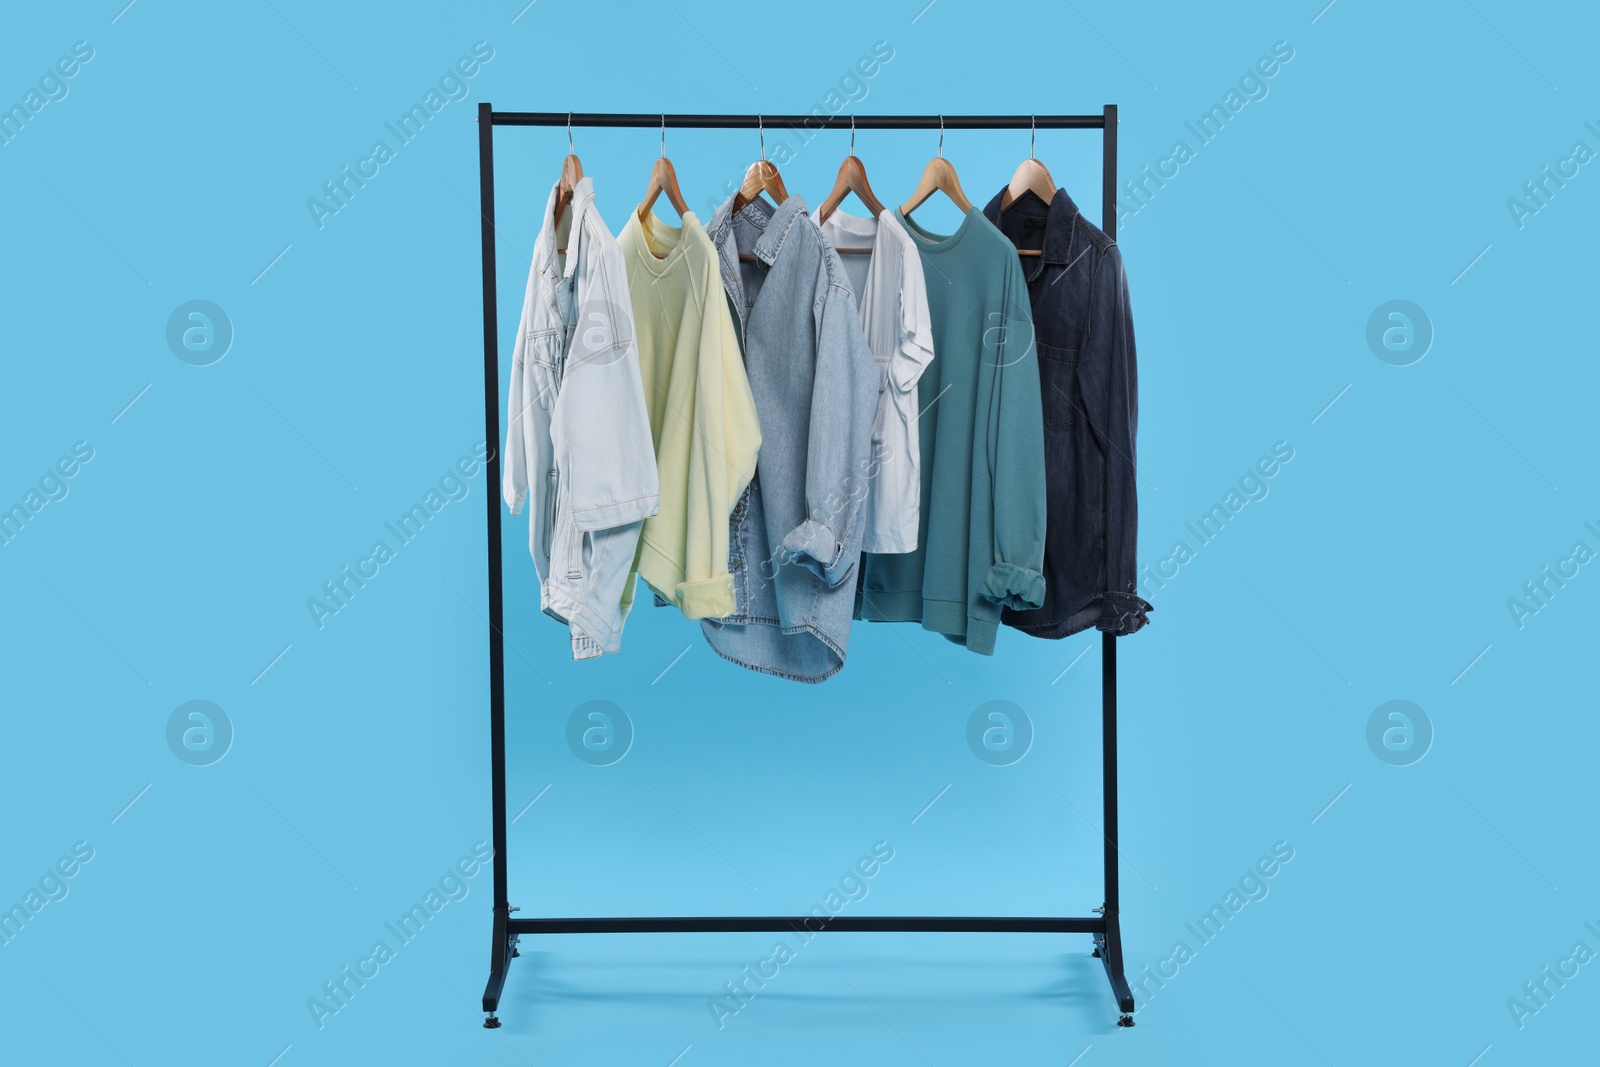 Photo of Rack with stylish clothes on wooden hangers against light blue background